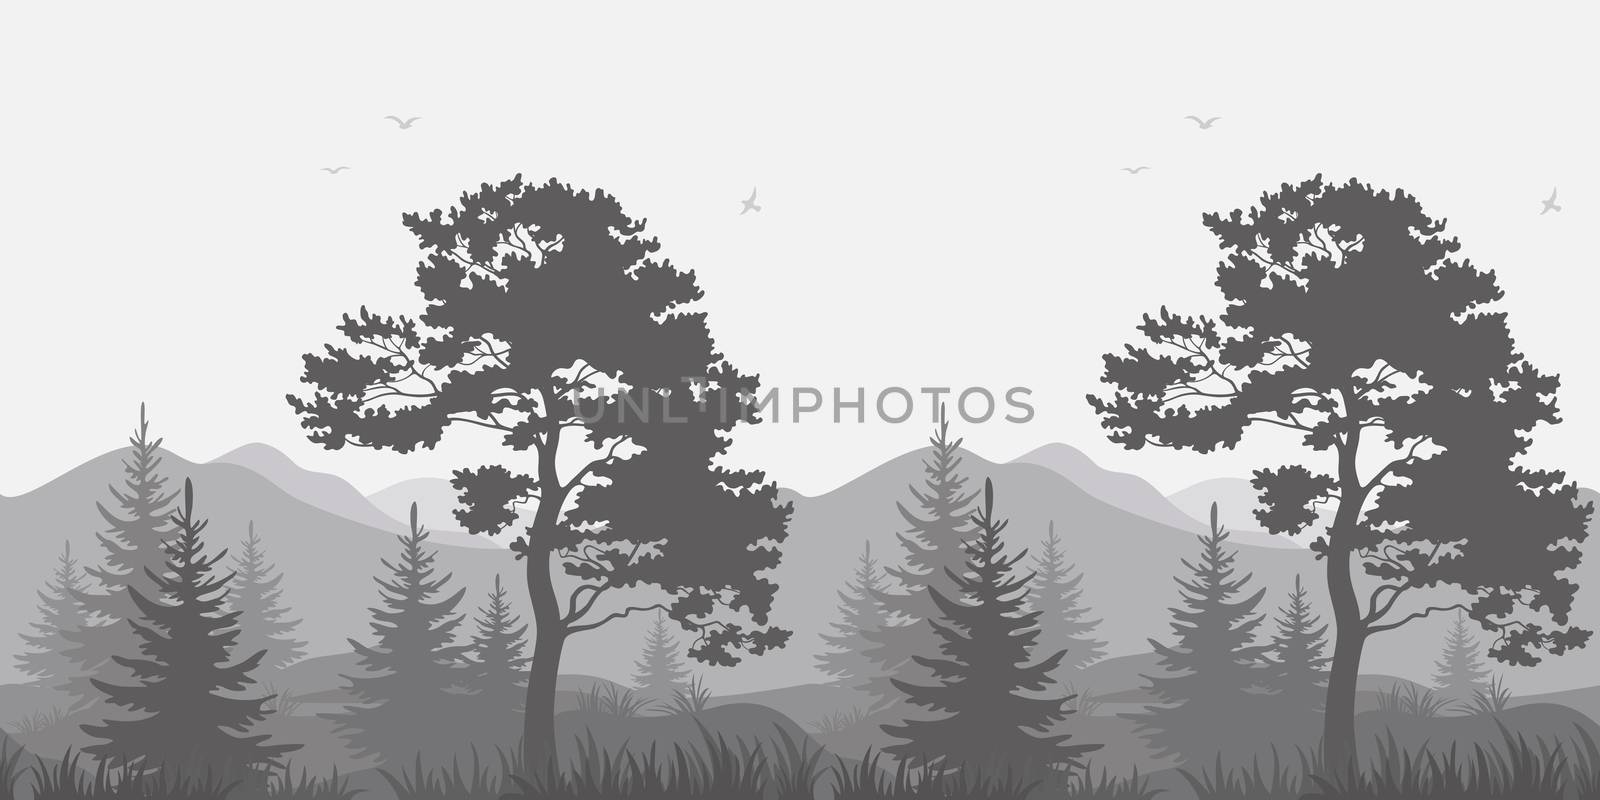 Seamless, mountain landscape with pines, conifer trees, birds and grass, gray silhouettes. 